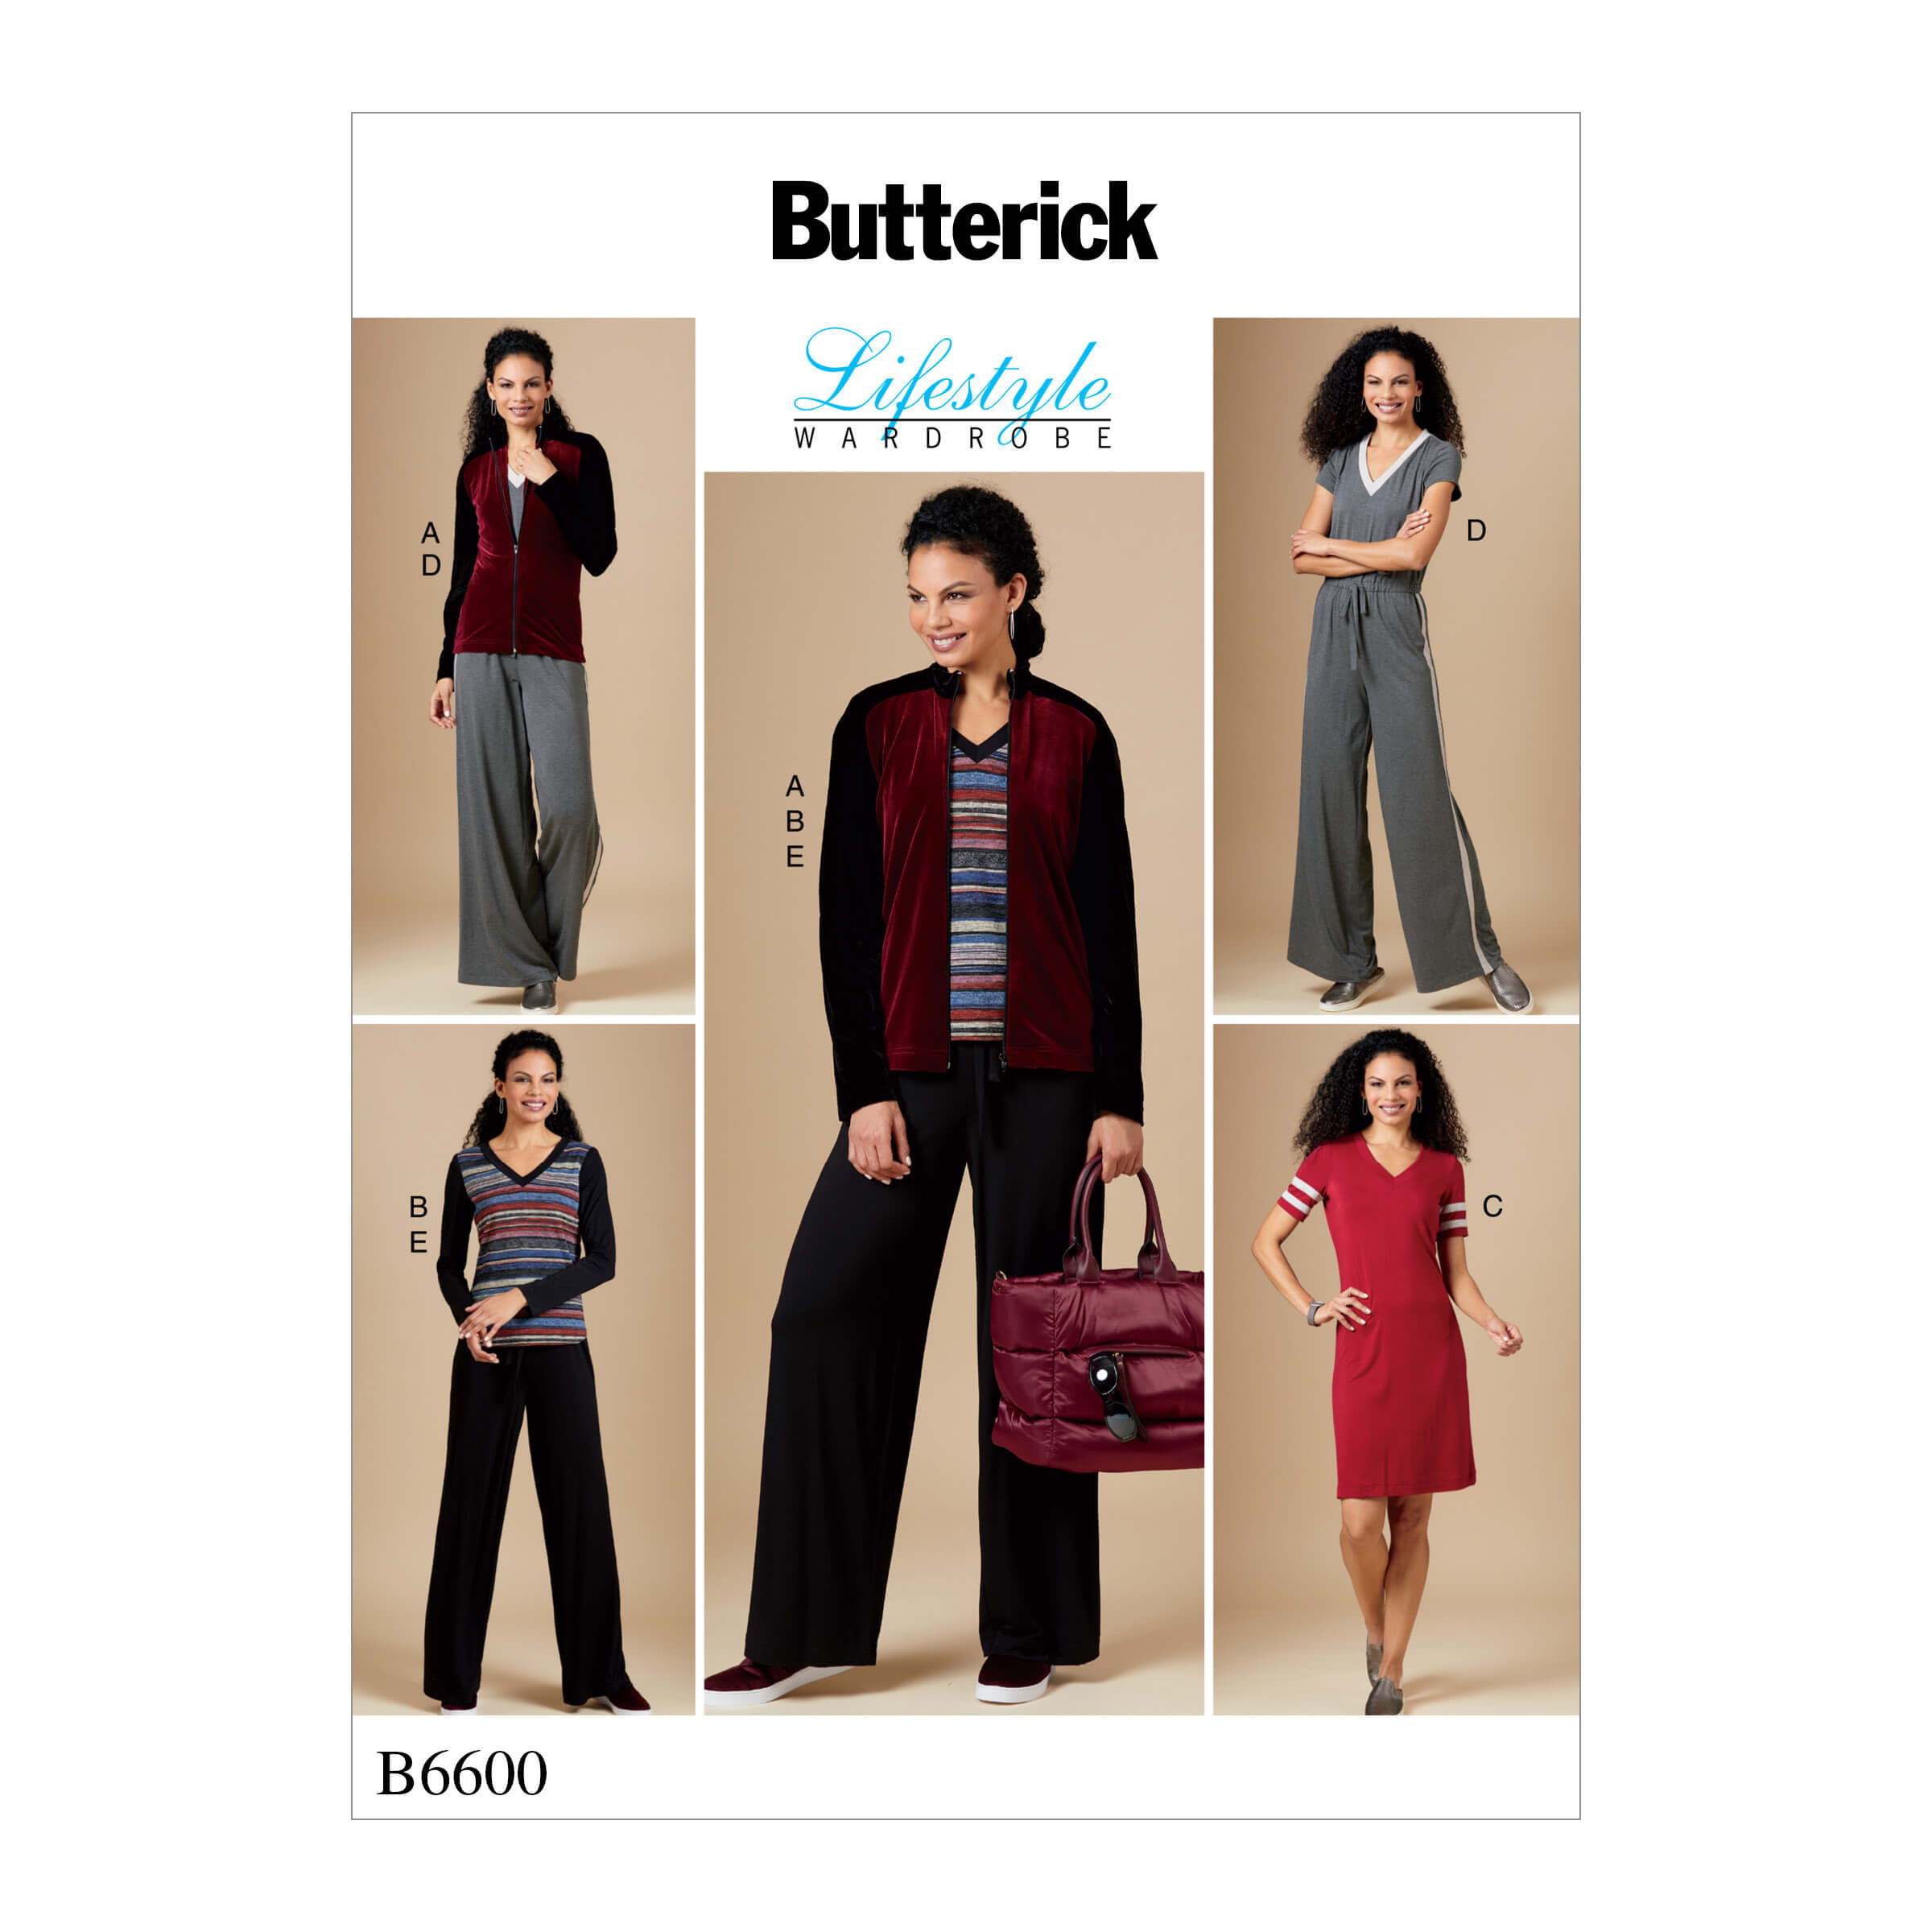 Butterick Sewing Pattern B6600 Misses' Jacket, Top, Dress, Jumpsuit and Pants